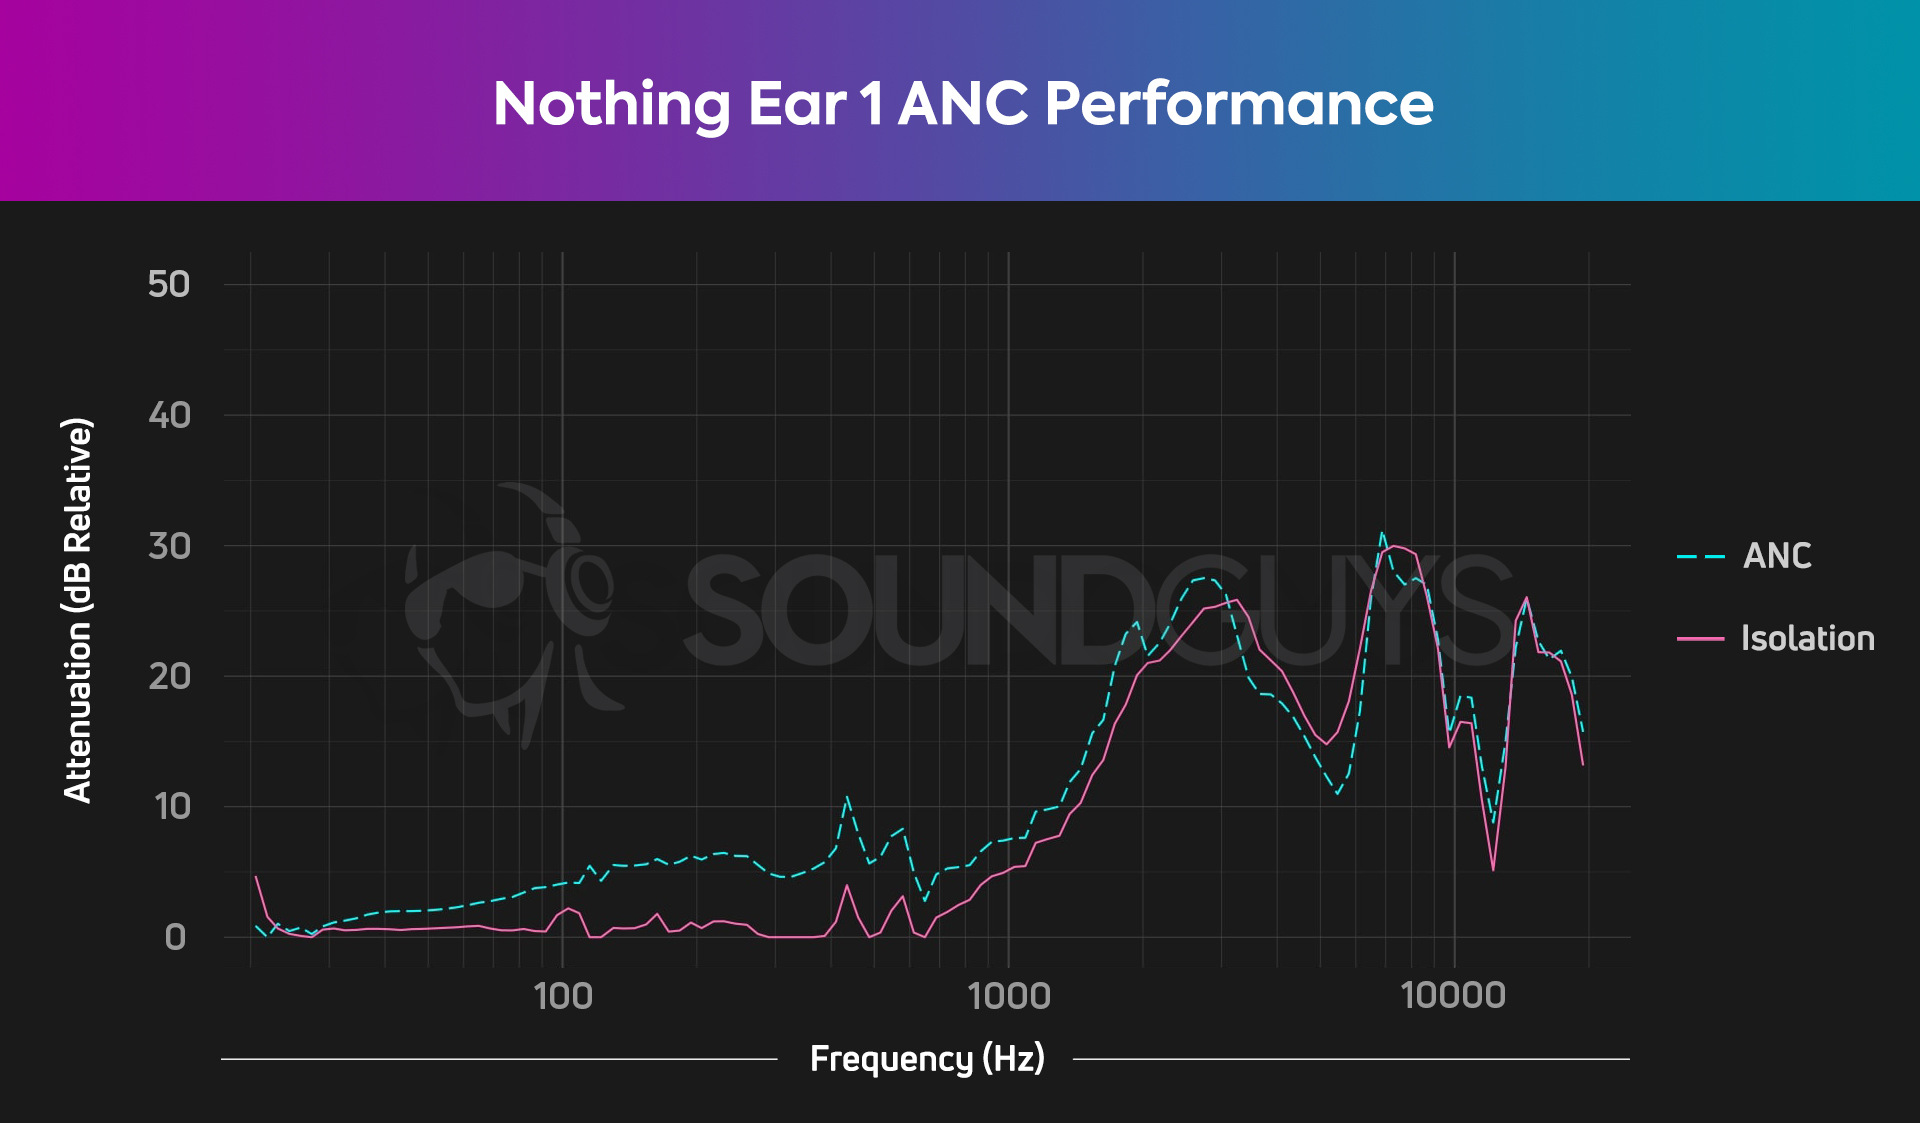 Chart showing the mediocre noise cancellation performance of the Nothing Ear 1.